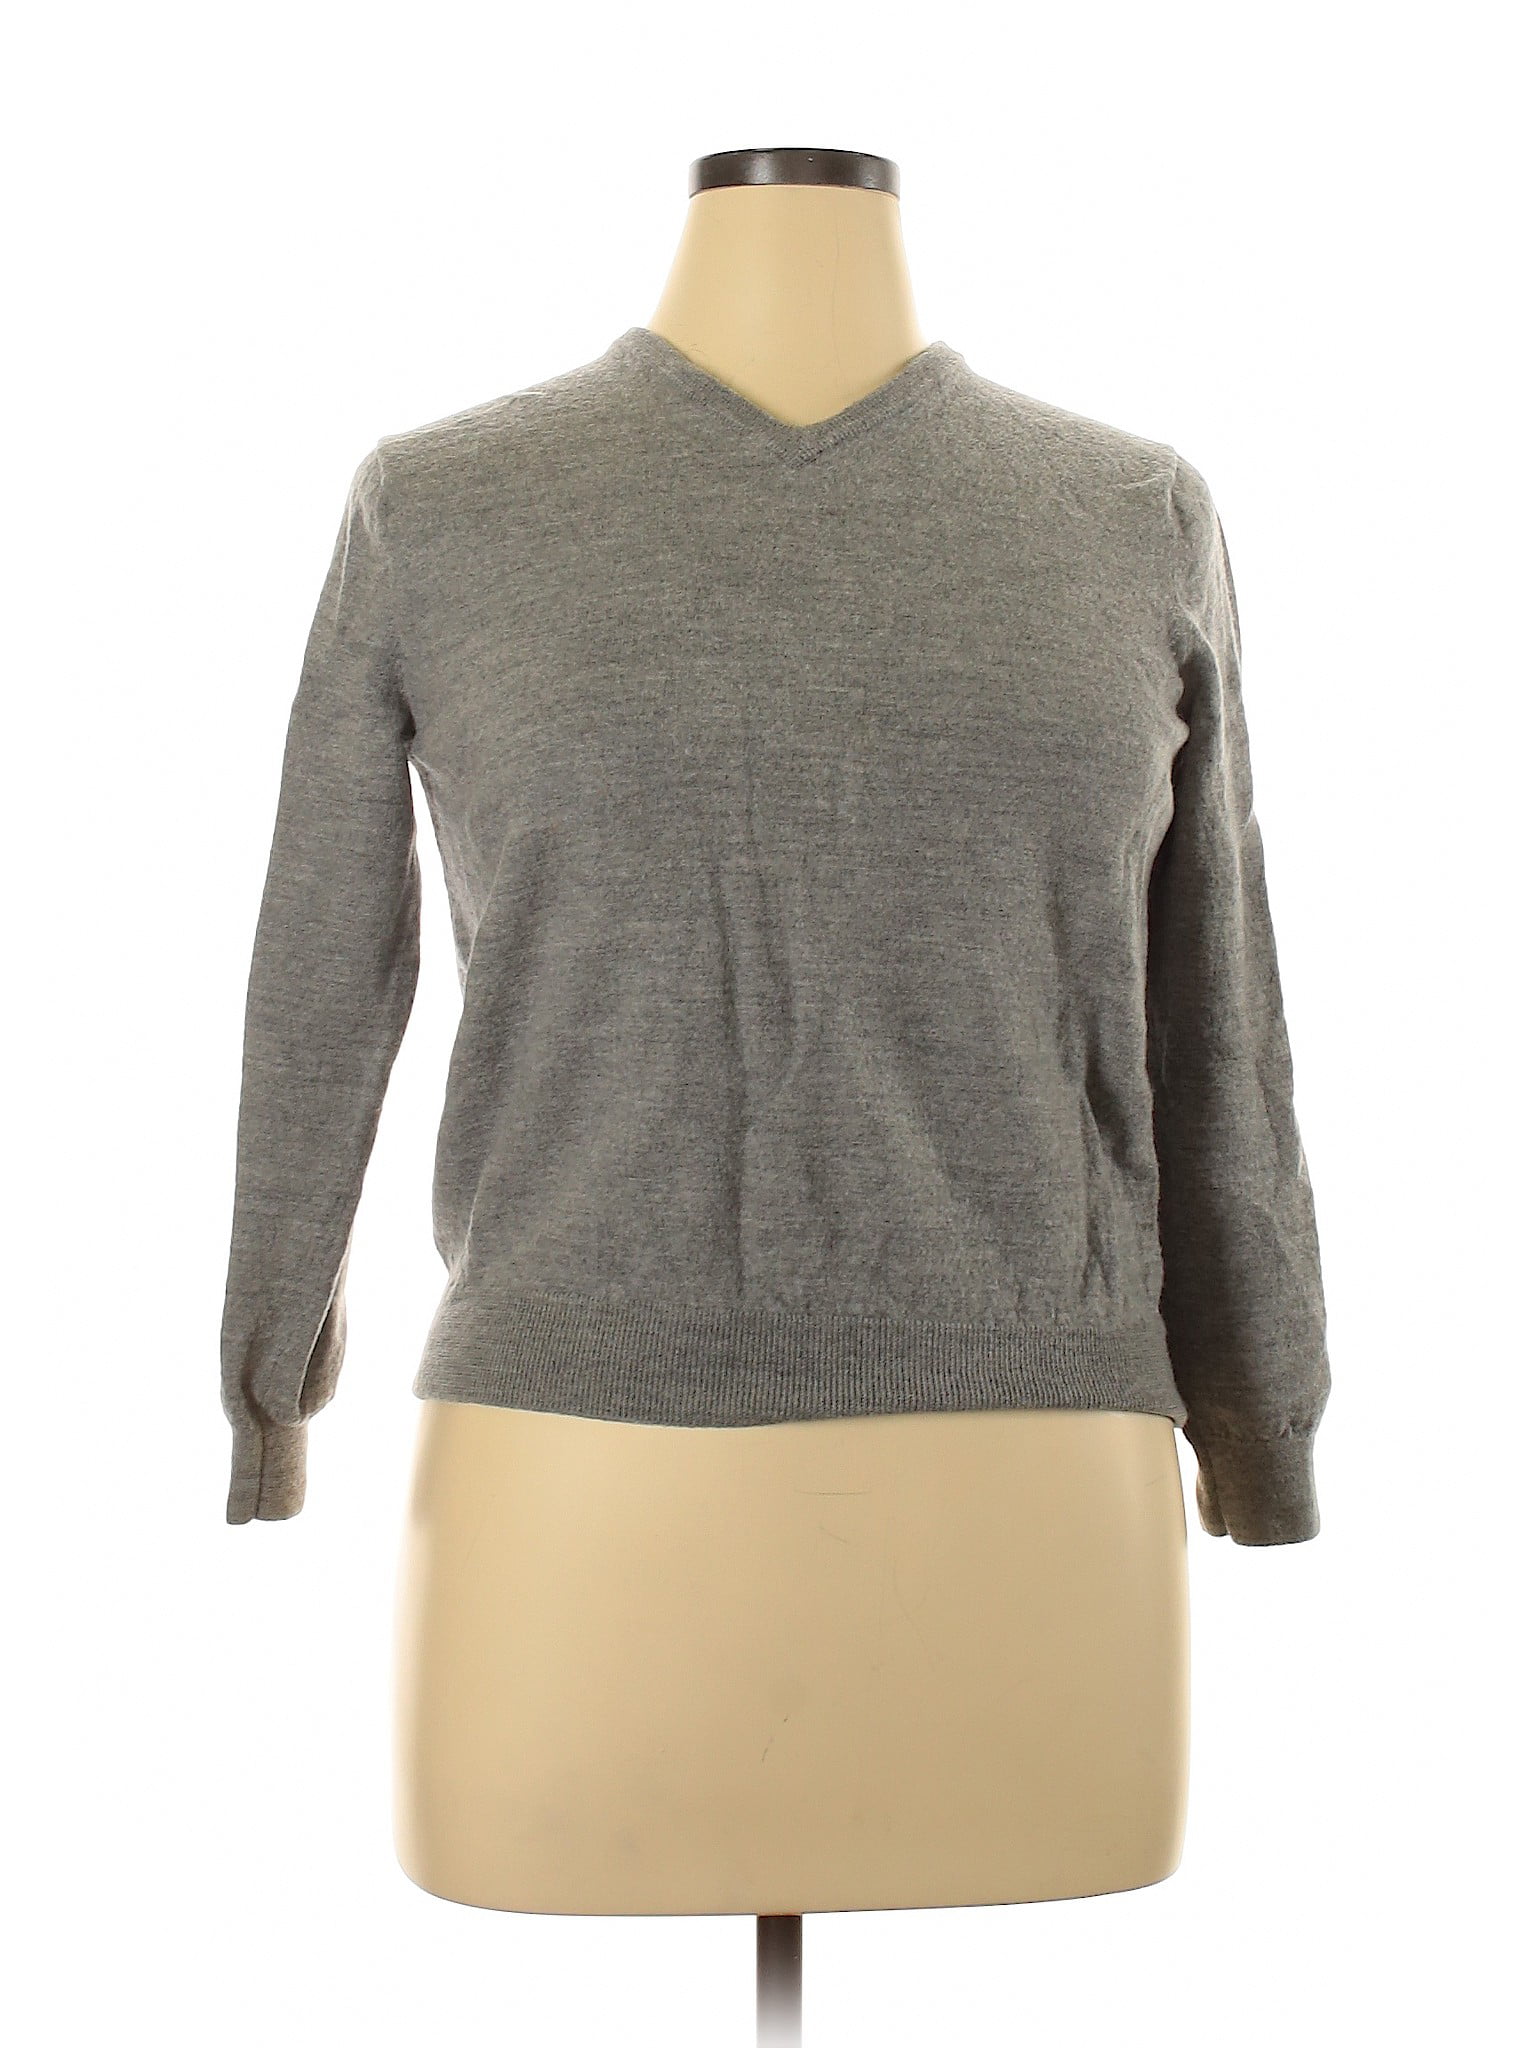 J.crew - Pre-Owned J.Crew Women's Size XL Wool Pullover Sweater ...